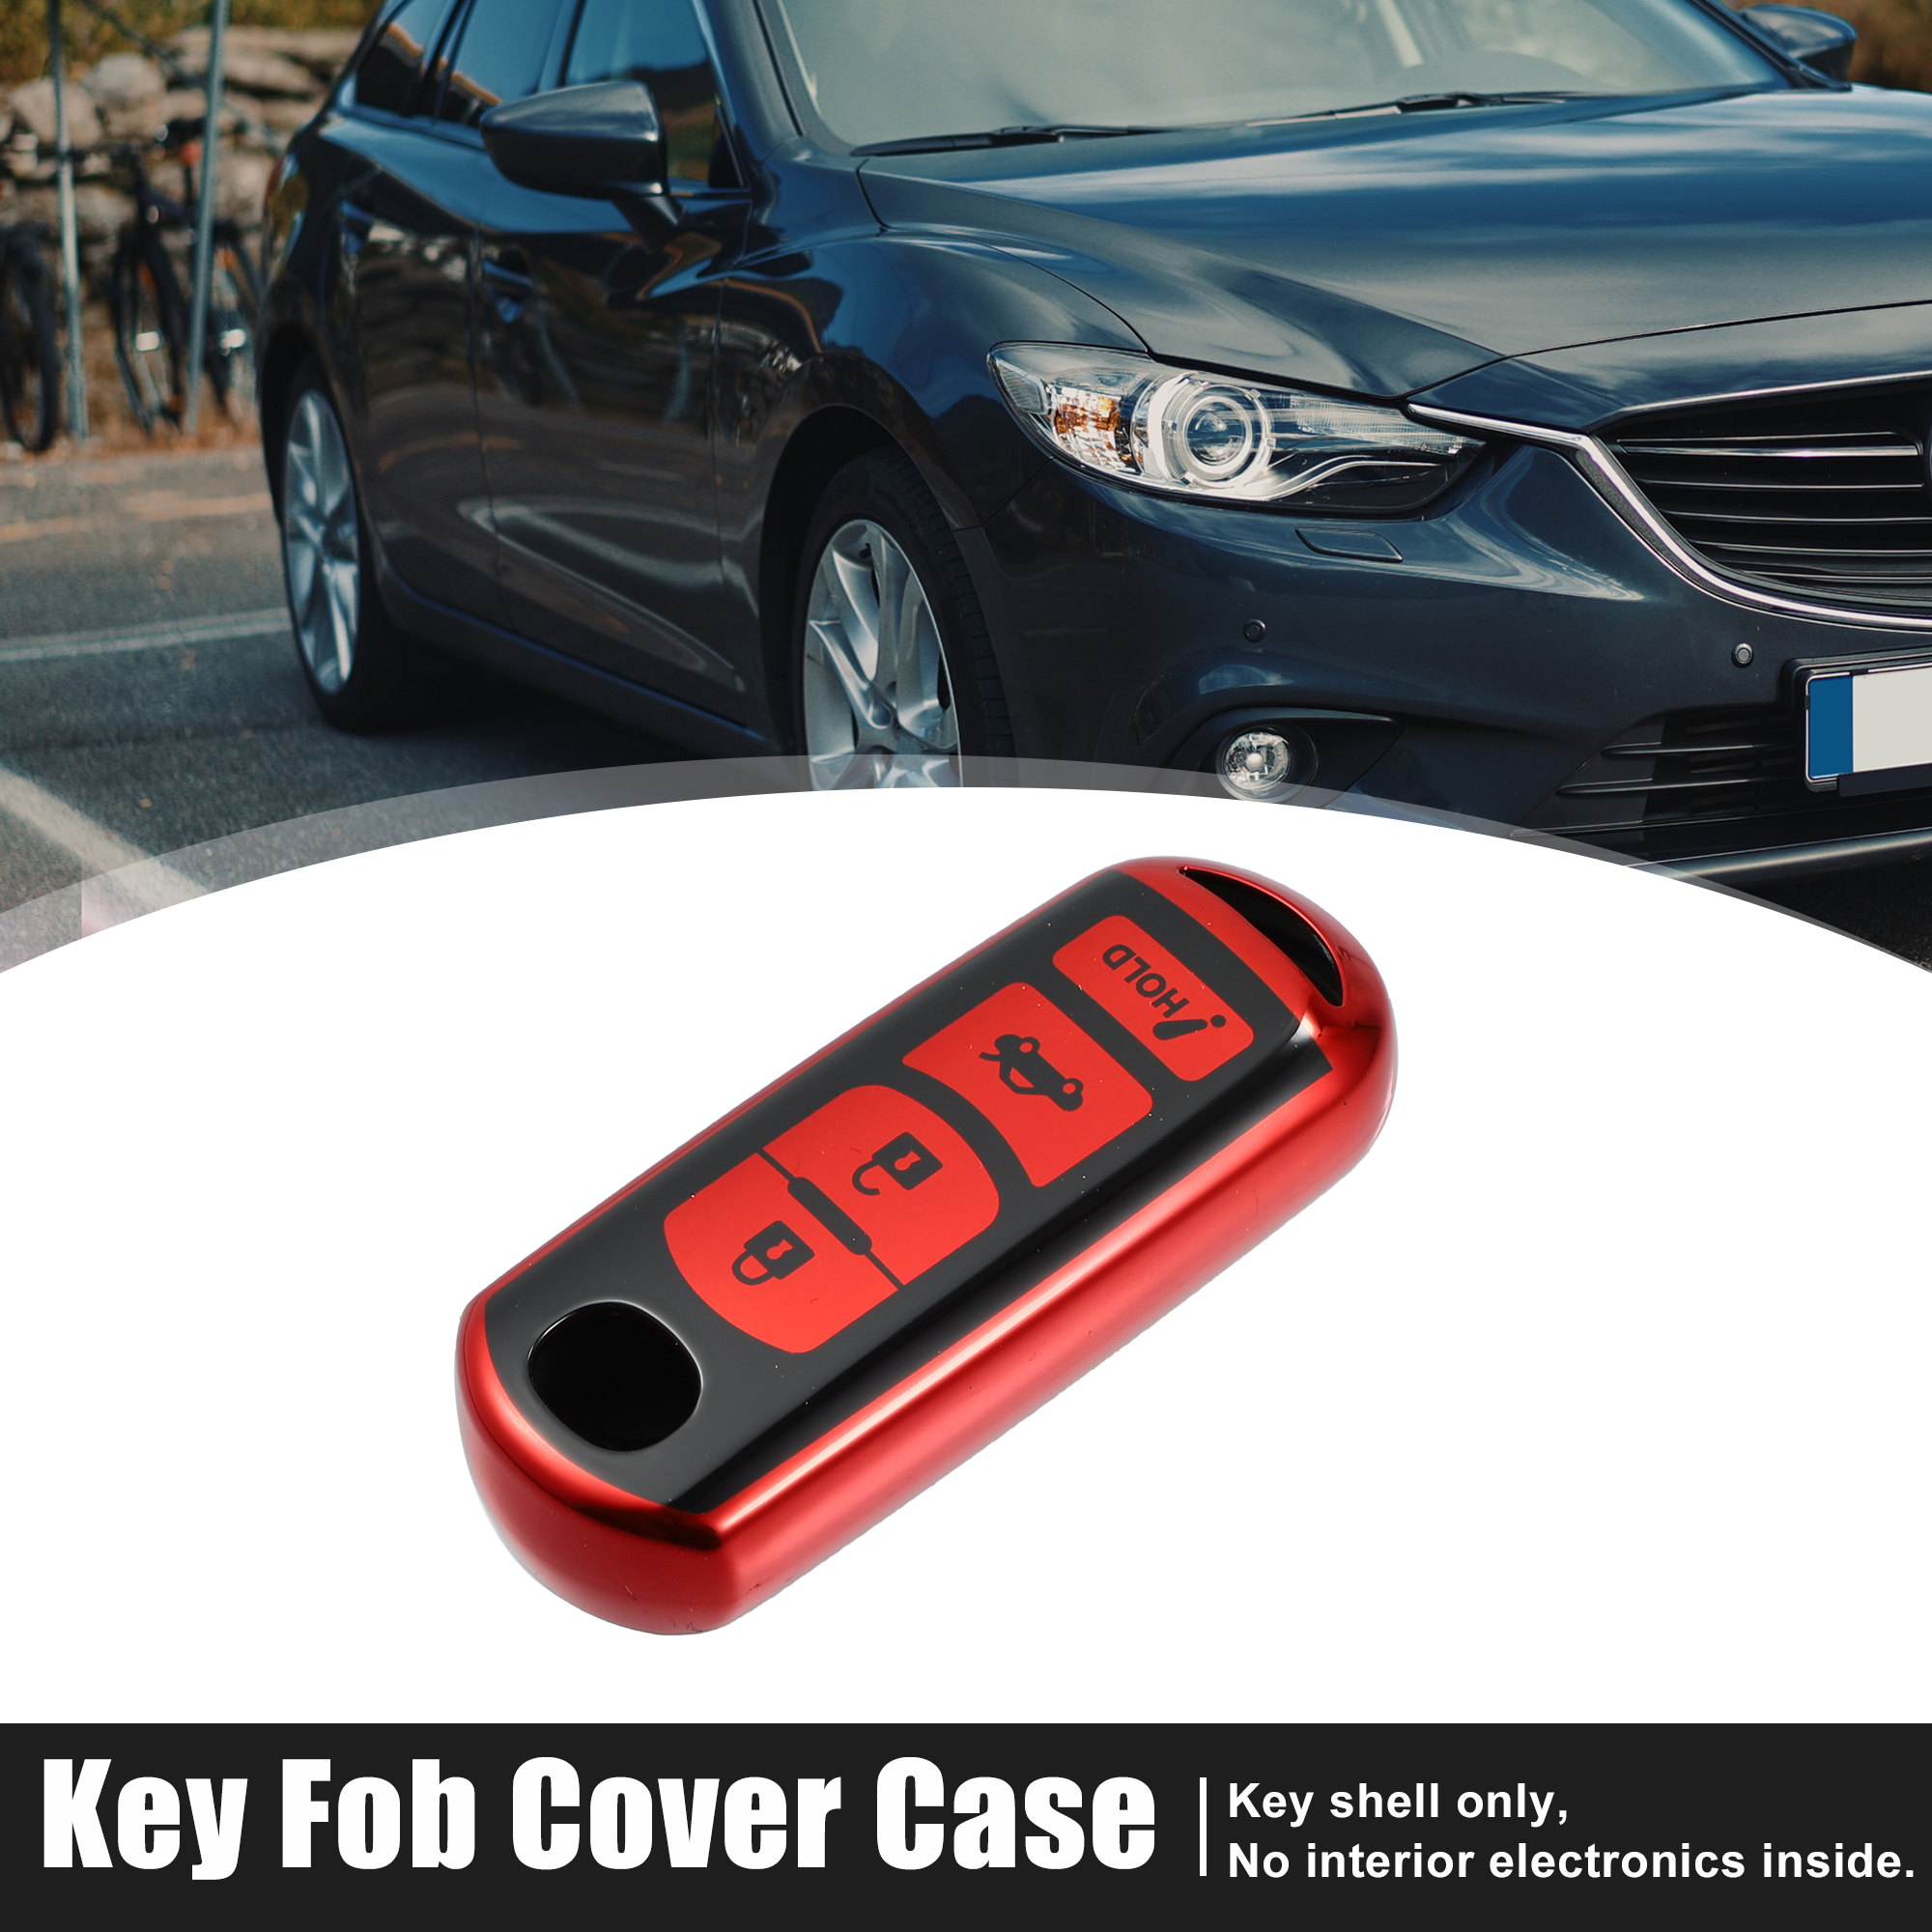 Unique Bargains TPU Key Fob Cover Case Key for Mazda 3 2014-2022 Key Fob Shell Protector Red